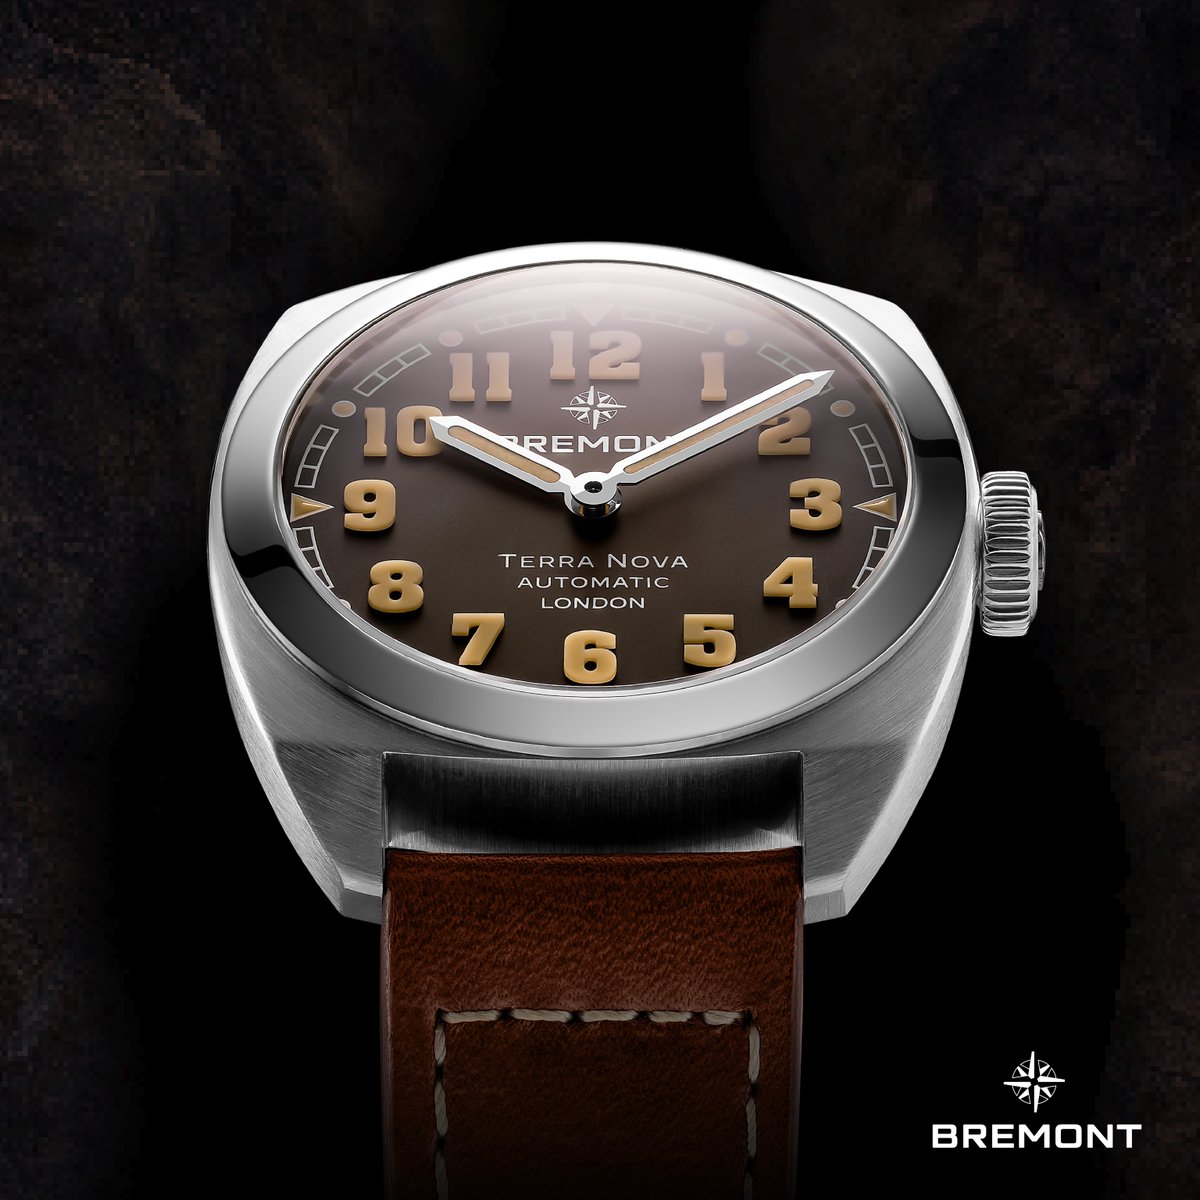 Inspired by pocket watches of the early 20th century, the new Terra Nova incorporates vintage design with modern functionality.

Explore the latest from Watches and Wonders: bit.ly/3PPw6hK

#CWSellors #JuraWatches #LuxuryWatches #Bremont #TerraNova #TakeItFurther